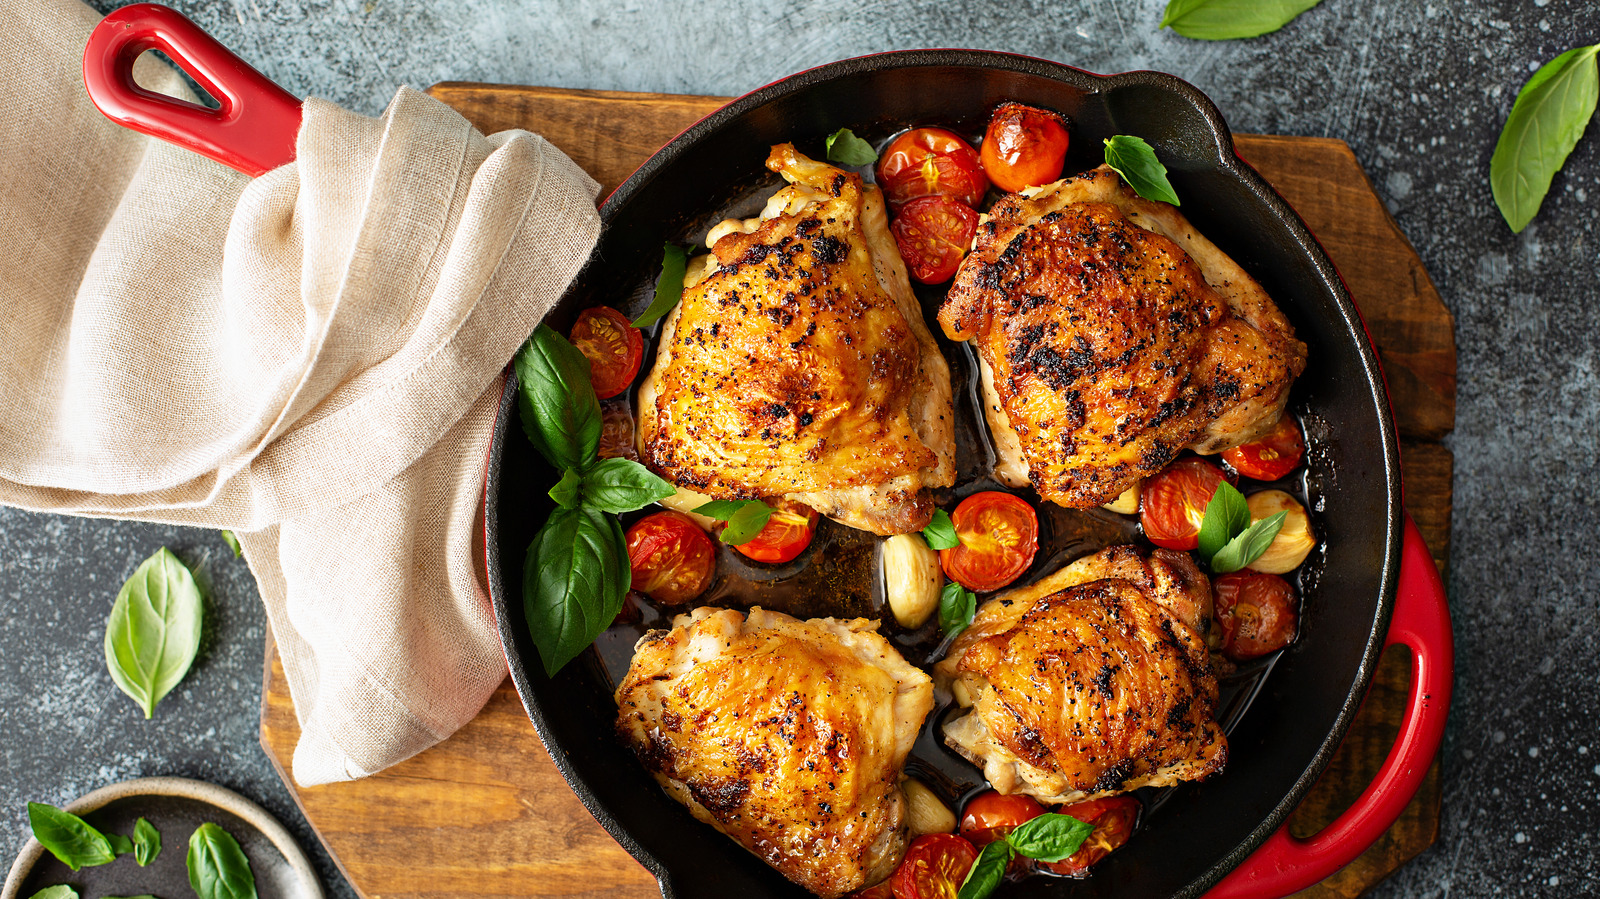 https://www.tastingtable.com/img/gallery/why-a-hot-pan-is-crucial-for-cooking-chicken/l-intro-1664450200.jpg